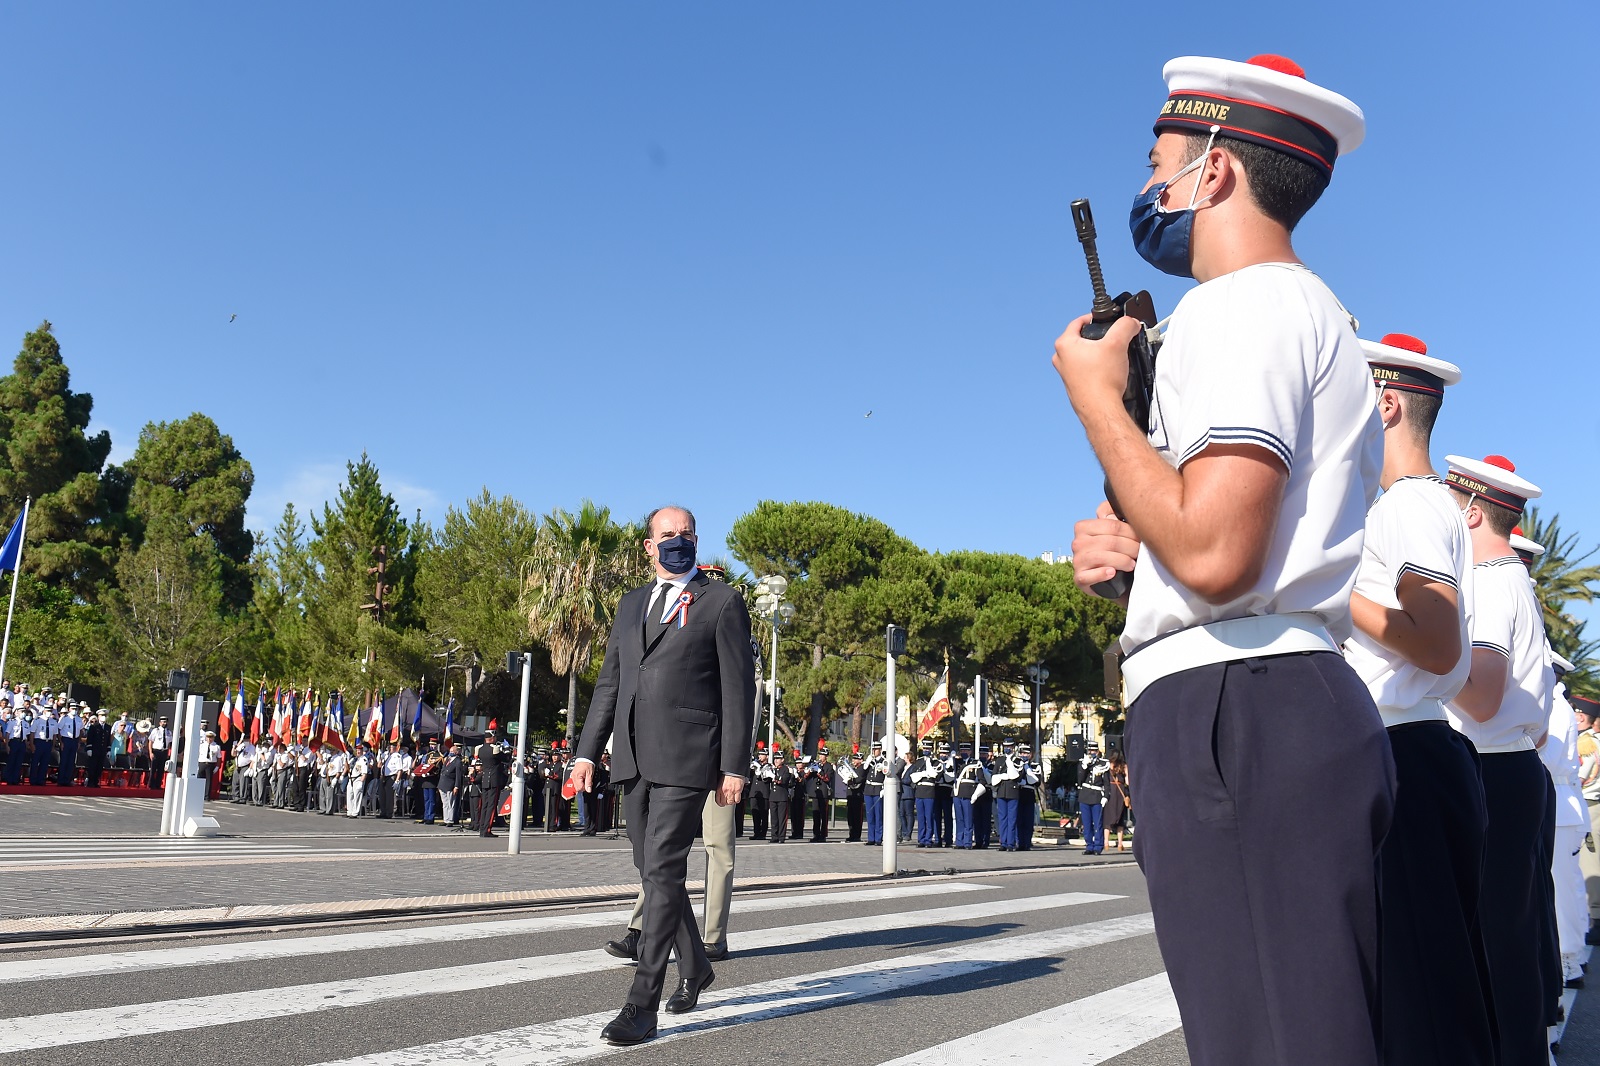 epa09344589 French Prime Minister Jean Castex (C) reviews troops during a military parade to mark the Bastille day in the coastal city of Nice, France, 14 July 2021. Castex visits Nice to attend a ceremony marking the 5th anniversary of a jihadist truck attack, which killed 86 people on Bastille Day on the Promenade des Anglais. A man drove a truck into a crowd, killing 86 people, in an attack claimed by the Islamic State group at a Bastille Day fireworks display.  EPA/NICOLAS TUCAT / POOL MAXPPP OUT